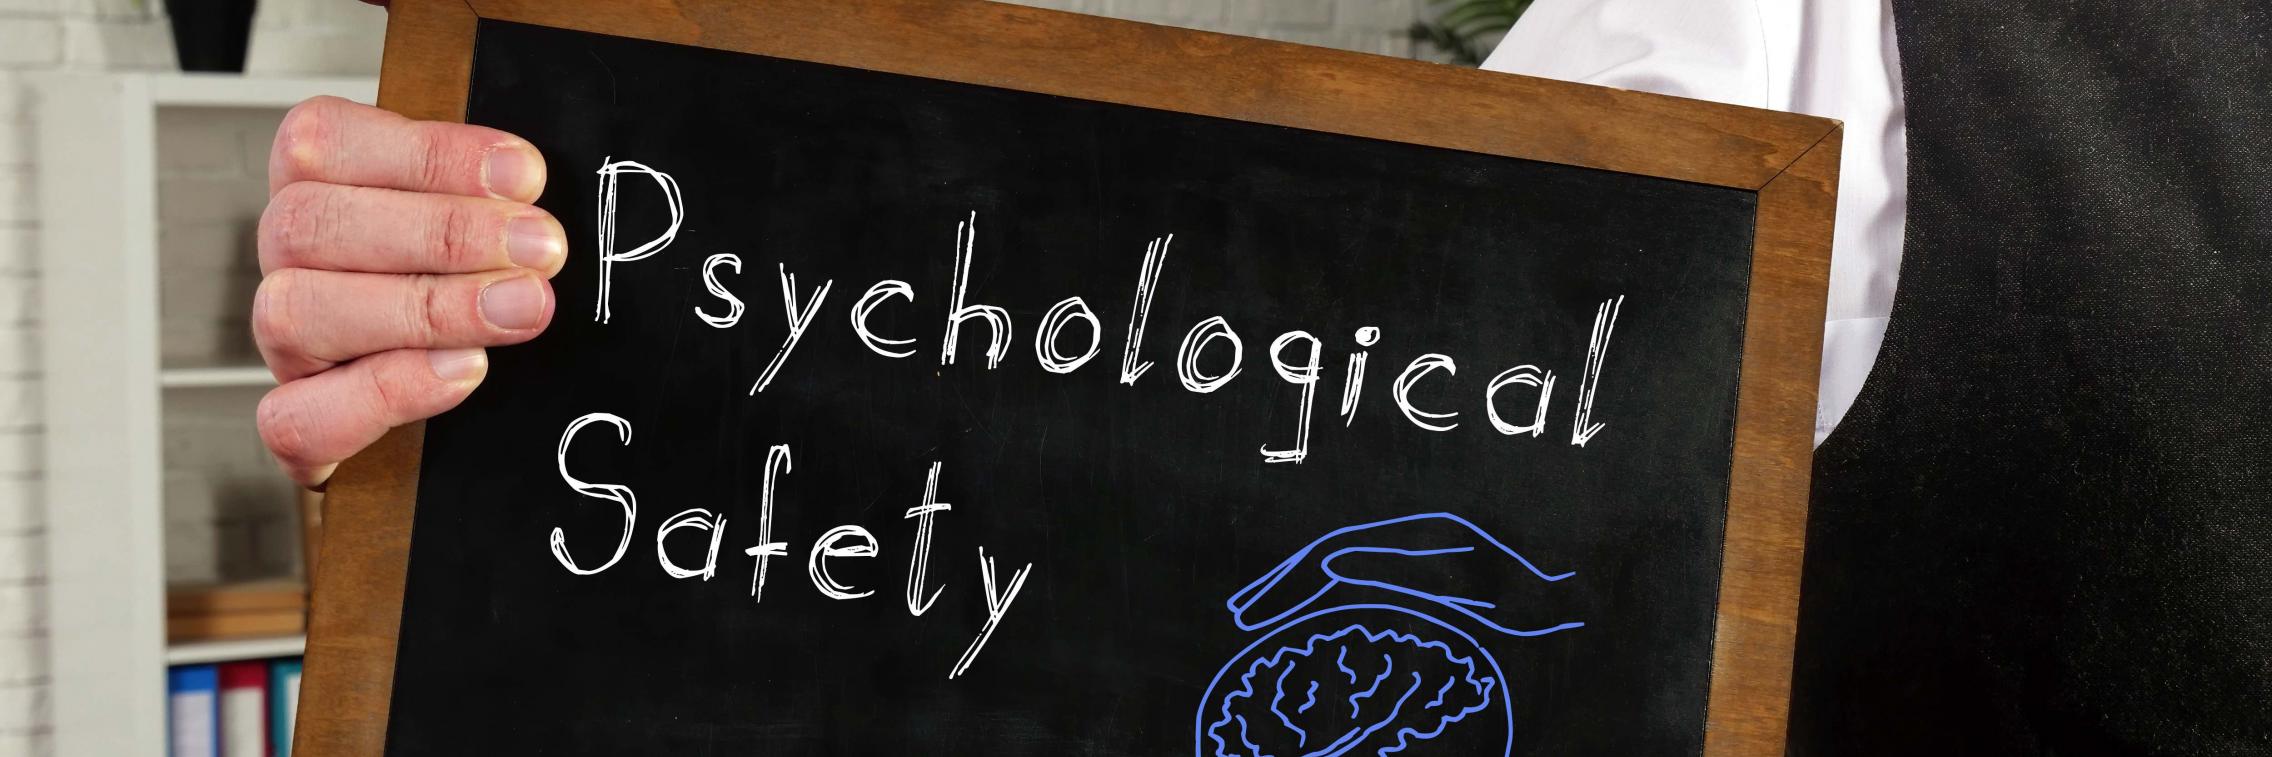 A chalk board with the words Psychological safety written on it